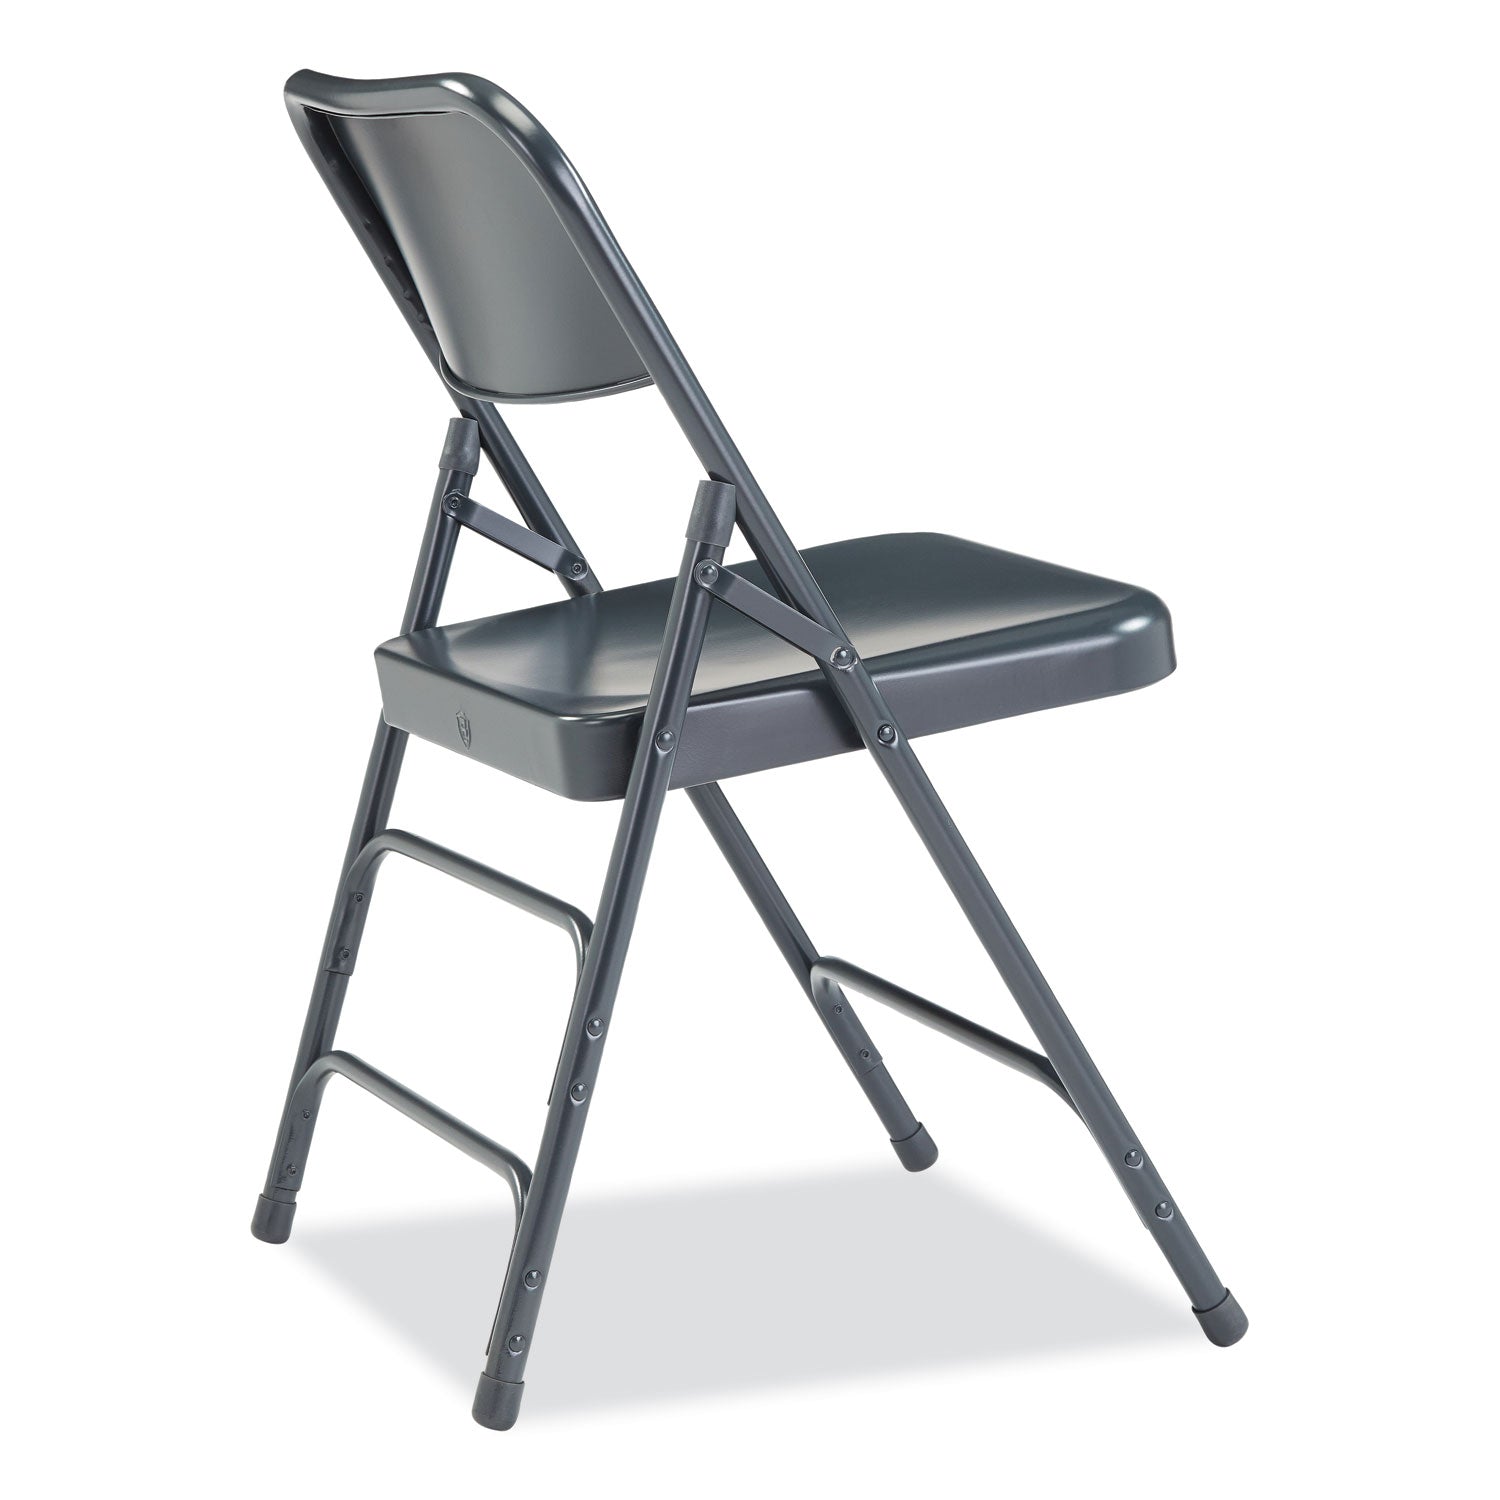 300-series-deluxe-all-steel-triple-brace-folding-chair-supports-480-lb-1725-seat-height-blue-4-ctships-in-1-3-bus-days_nps304 - 4